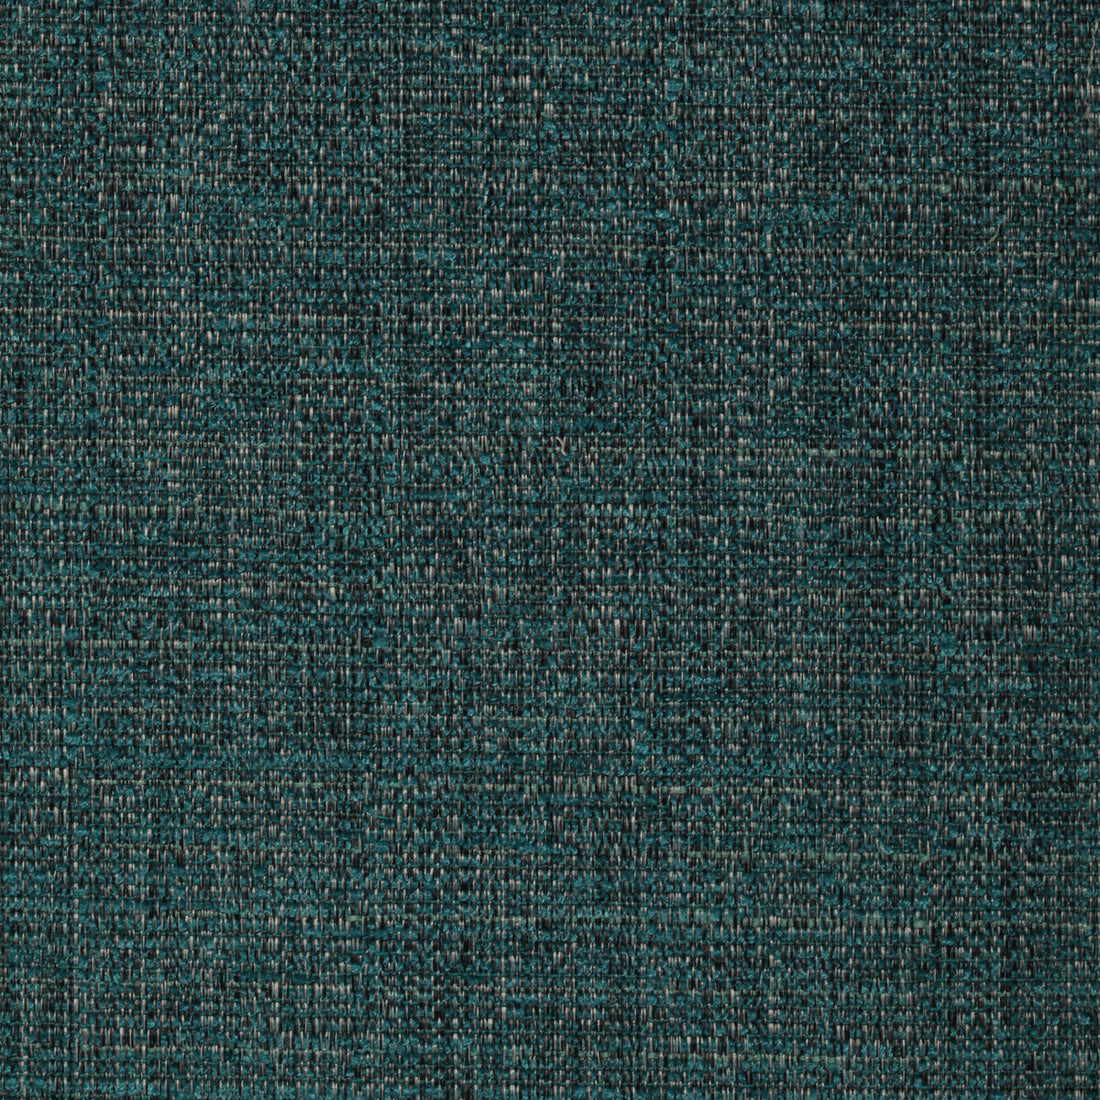 Kravet Smart fabric in 35127-35 color - pattern 35127.35.0 - by Kravet Smart in the Performance Crypton Home collection